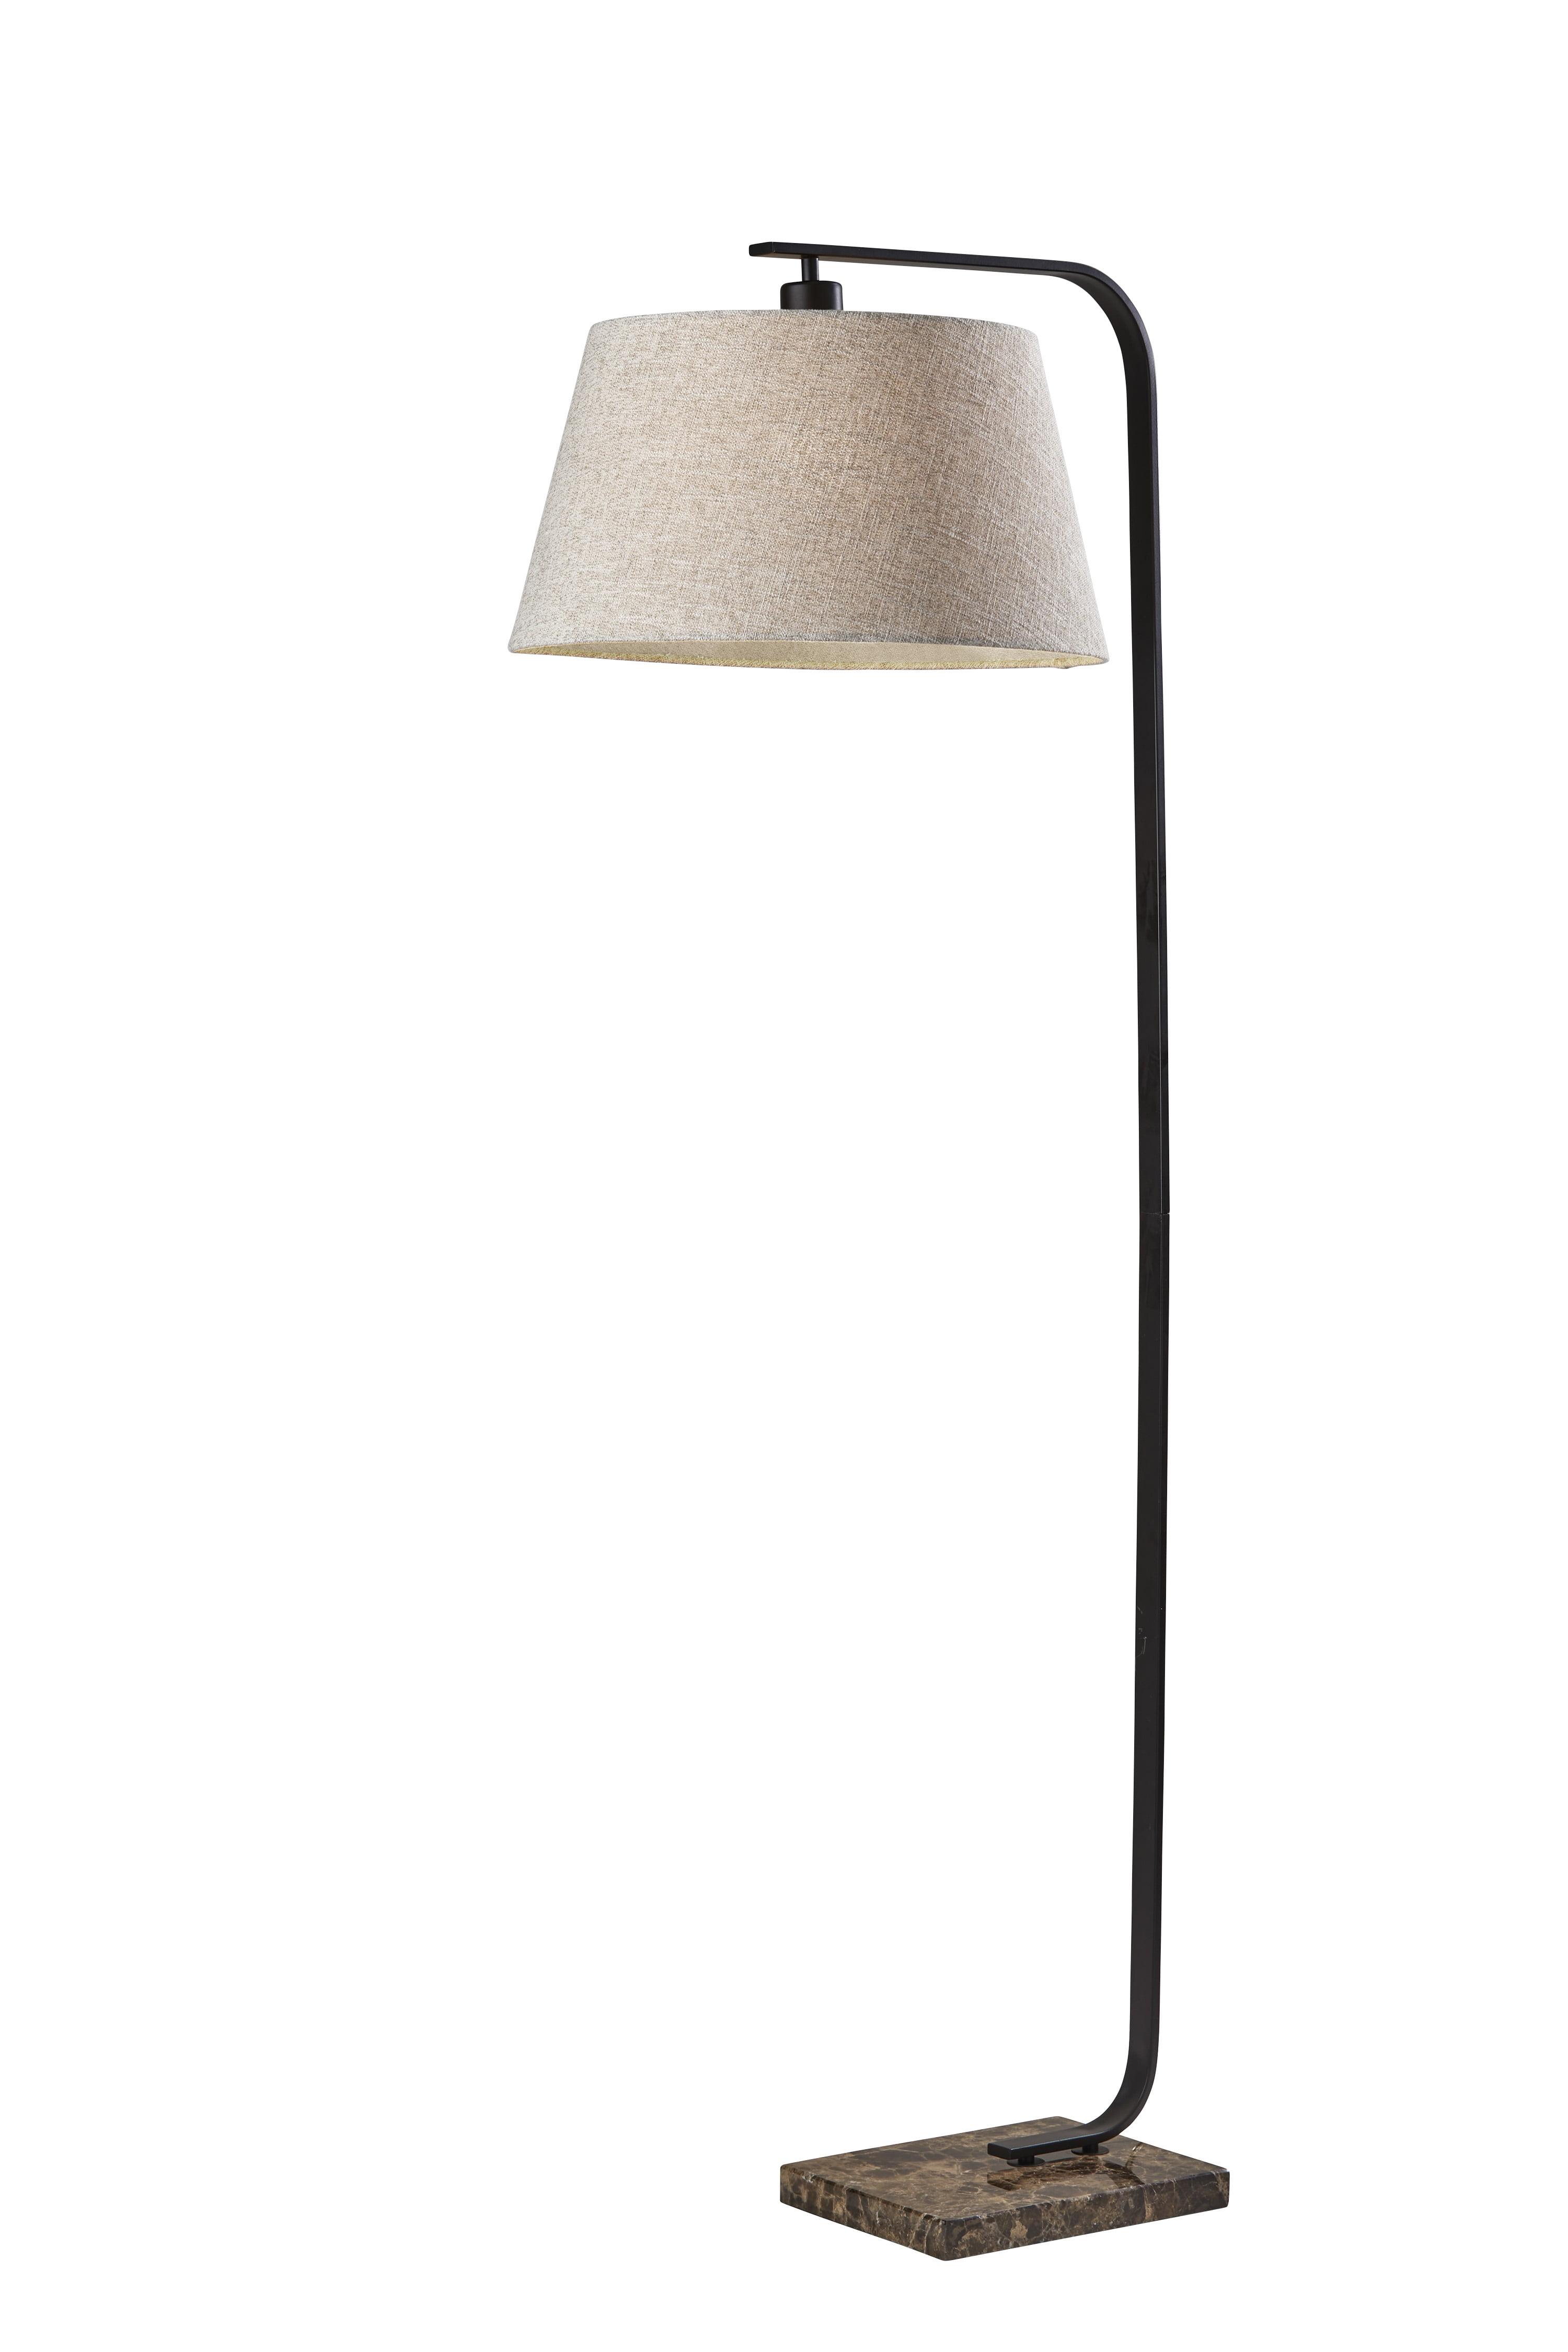 Bernard Arc Floor Lamp with Black Finish and Brown Marble Base